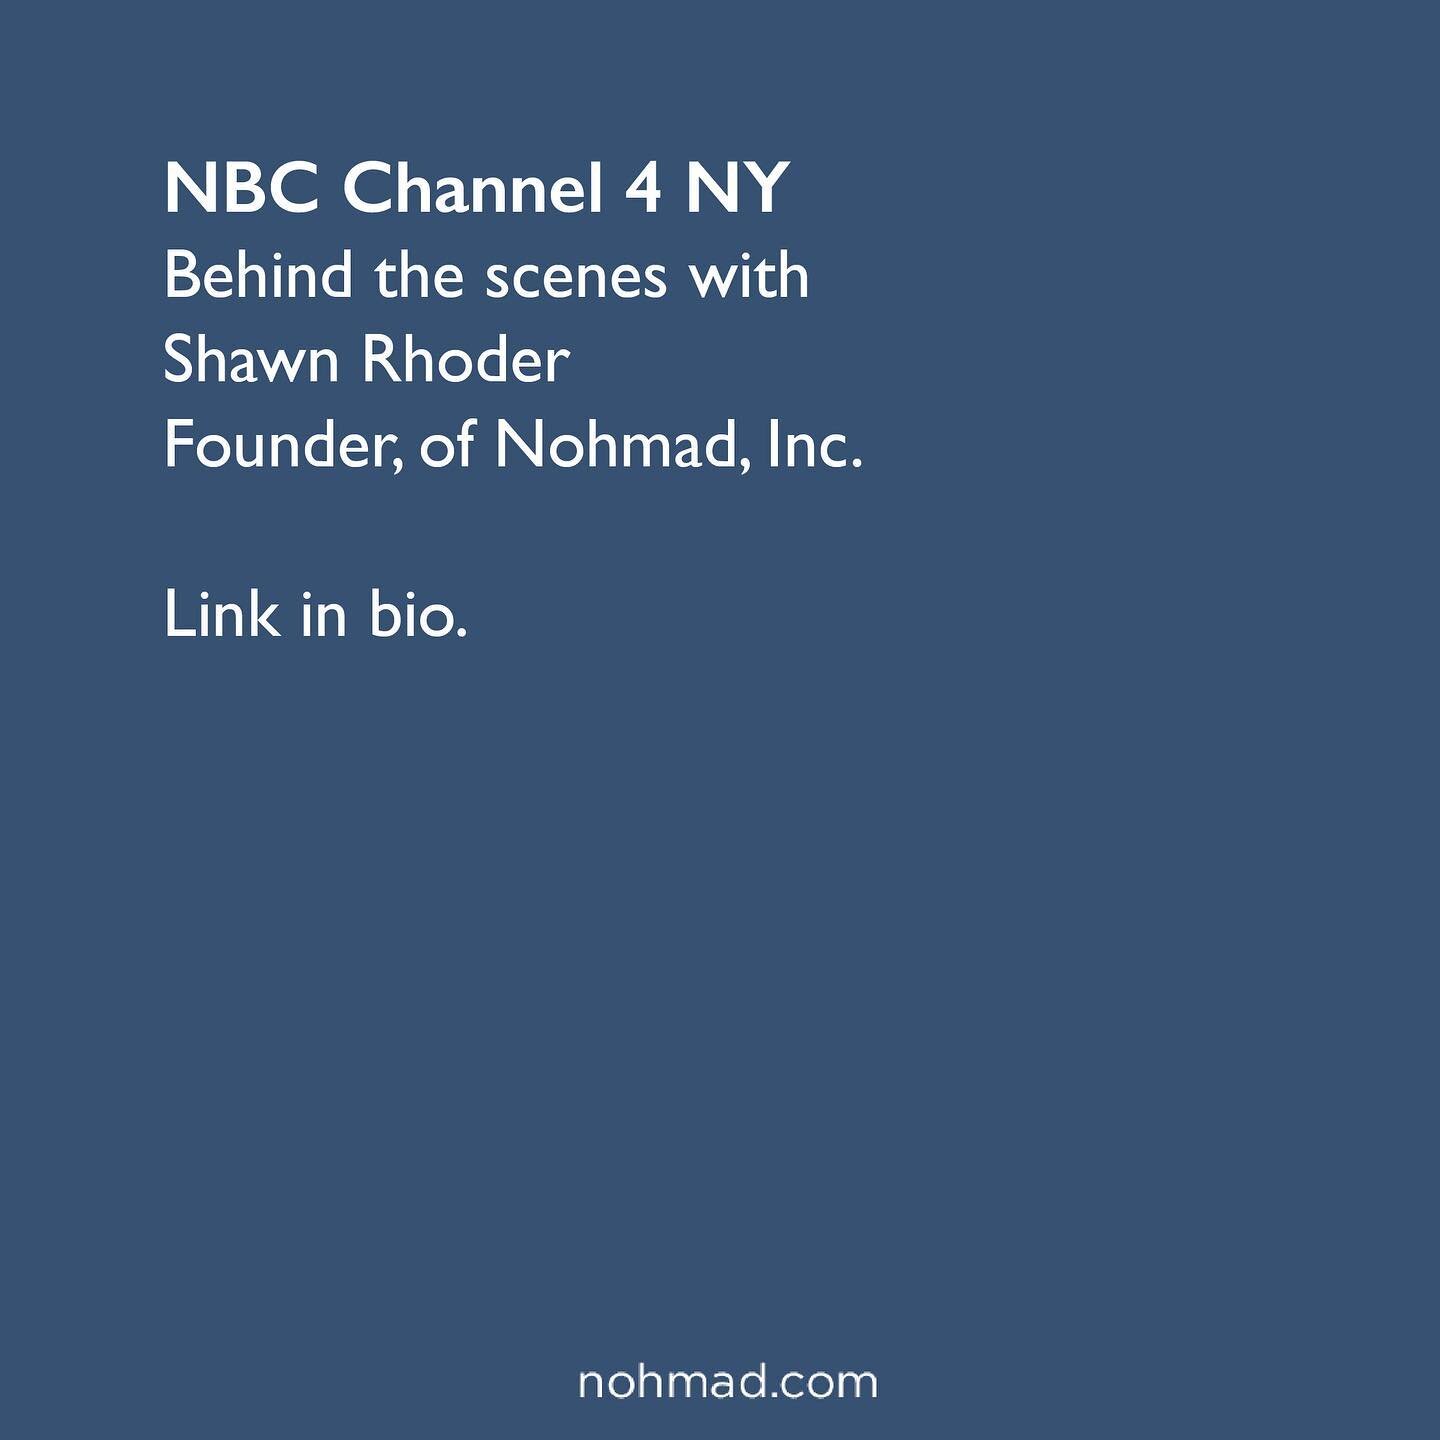 NBC Channel 4 NYC segment about the #rohver and our founder Shawn Rhoder.

&bull;
@nbcnewyork